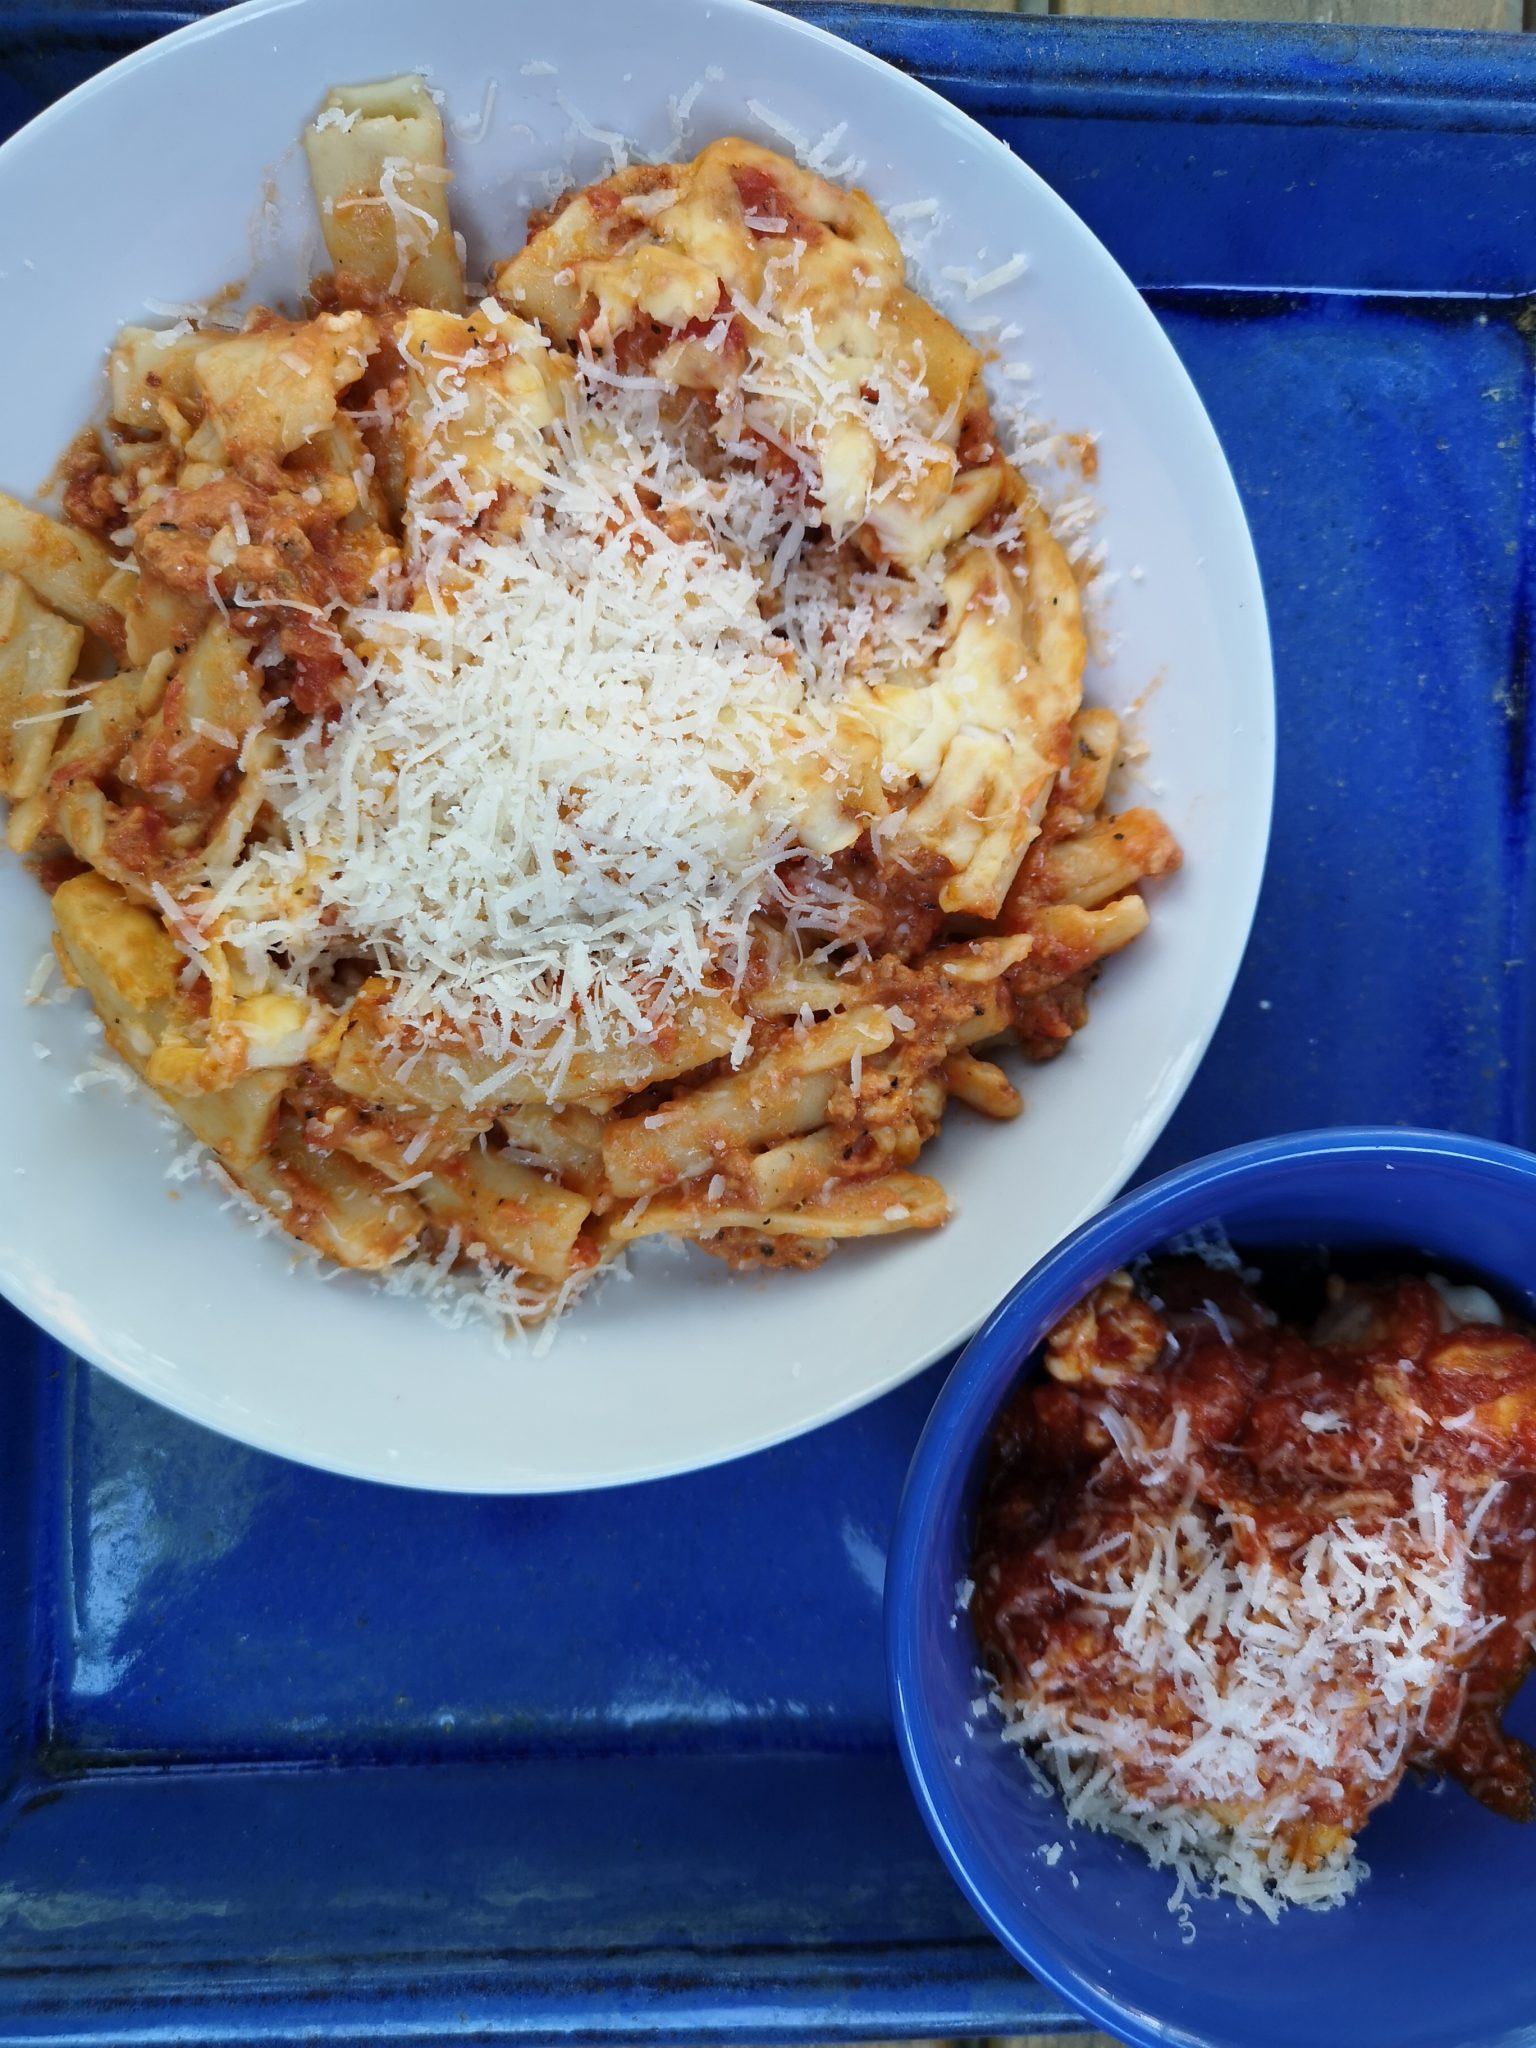 As good as Carmela's baked ziti? - Andrew Coppolino - World of Flavour